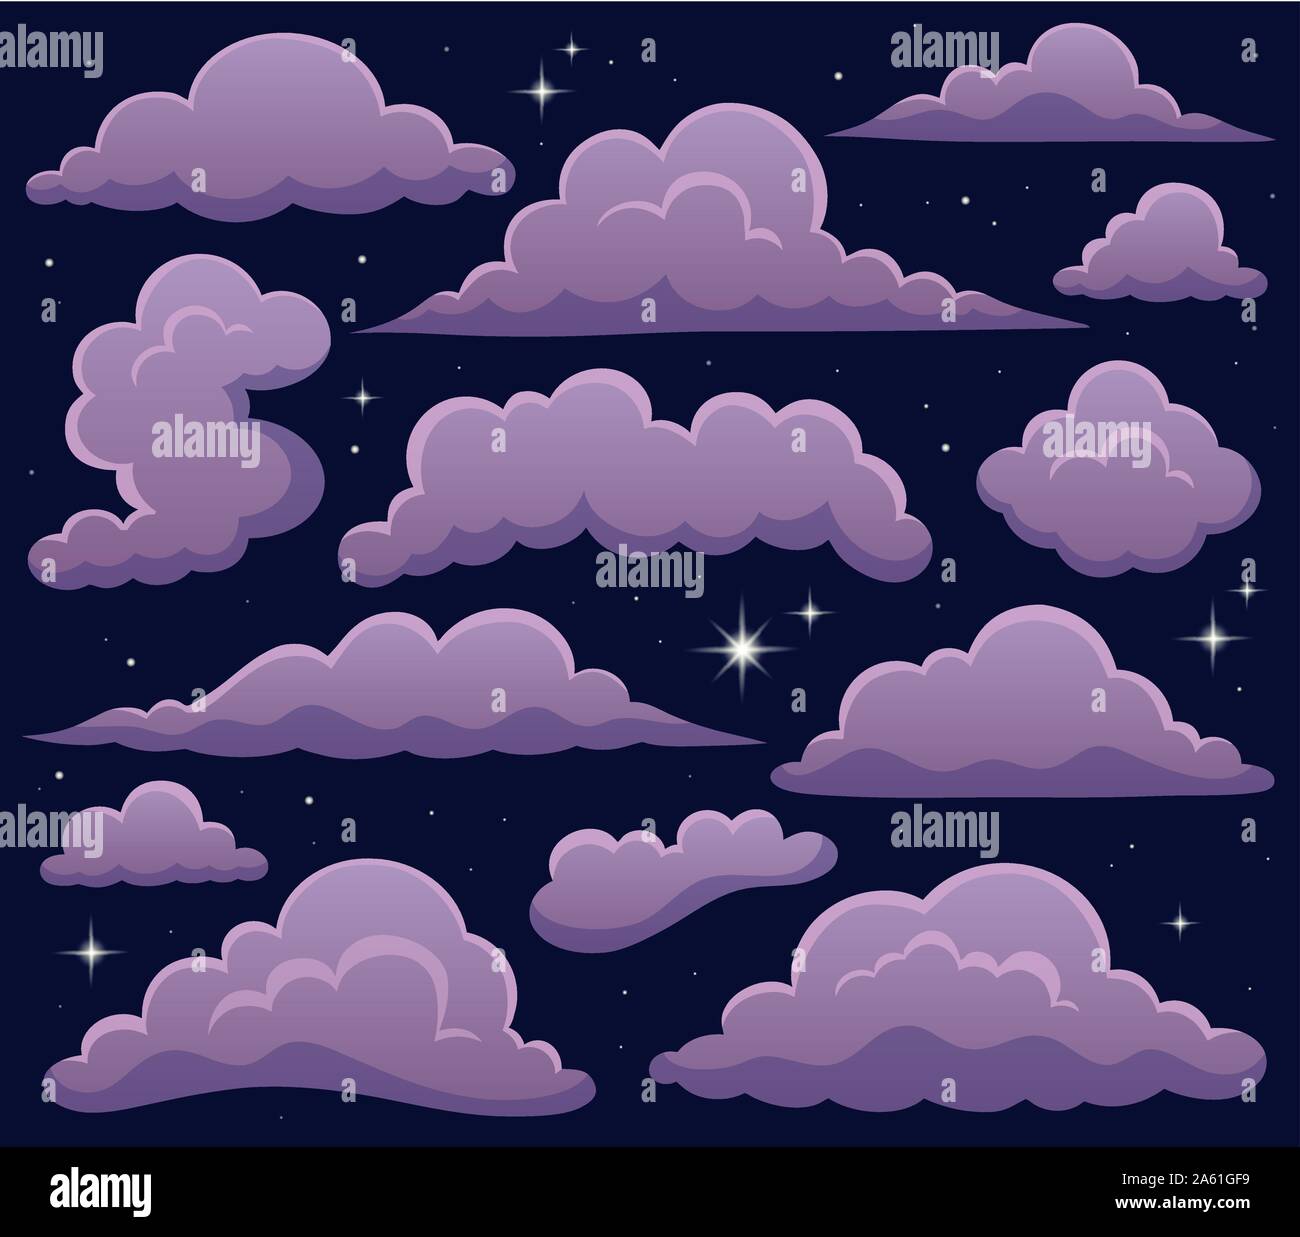 Clouds topic image 4 - eps10 vector illustration. Stock Vector